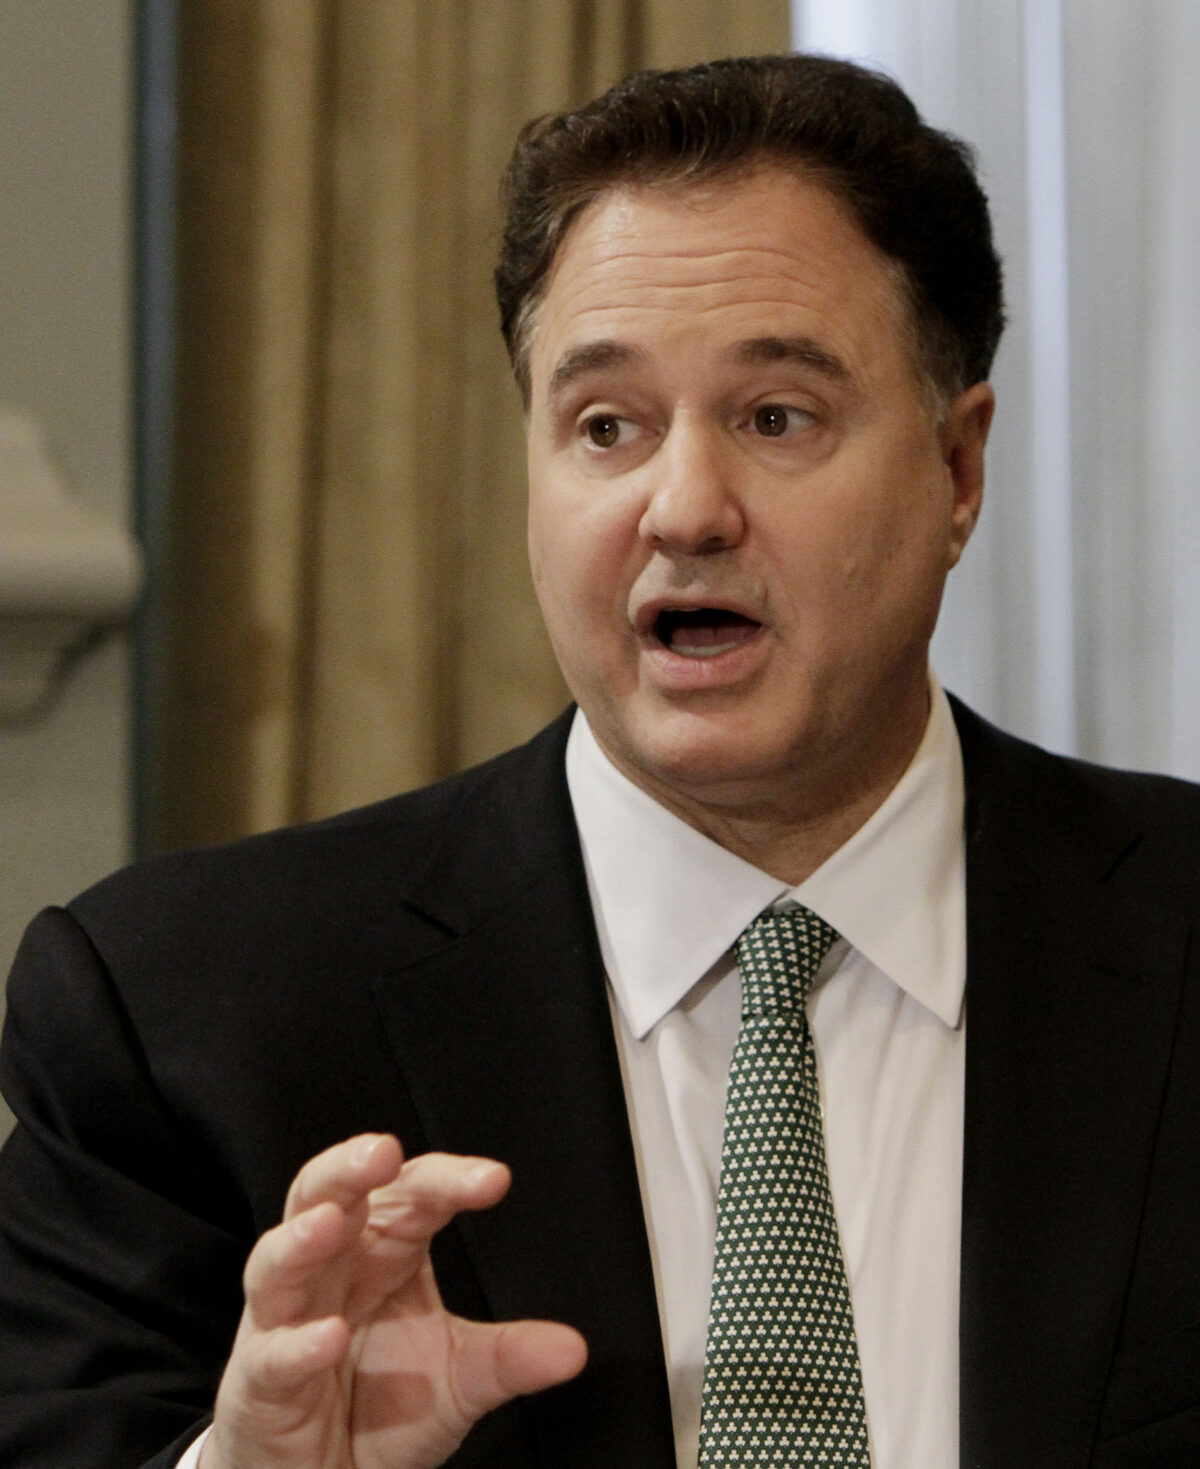 Boston Celtics co-Governor Stephen Pagliuca hints at interest in buying Liverpool or Manchester United